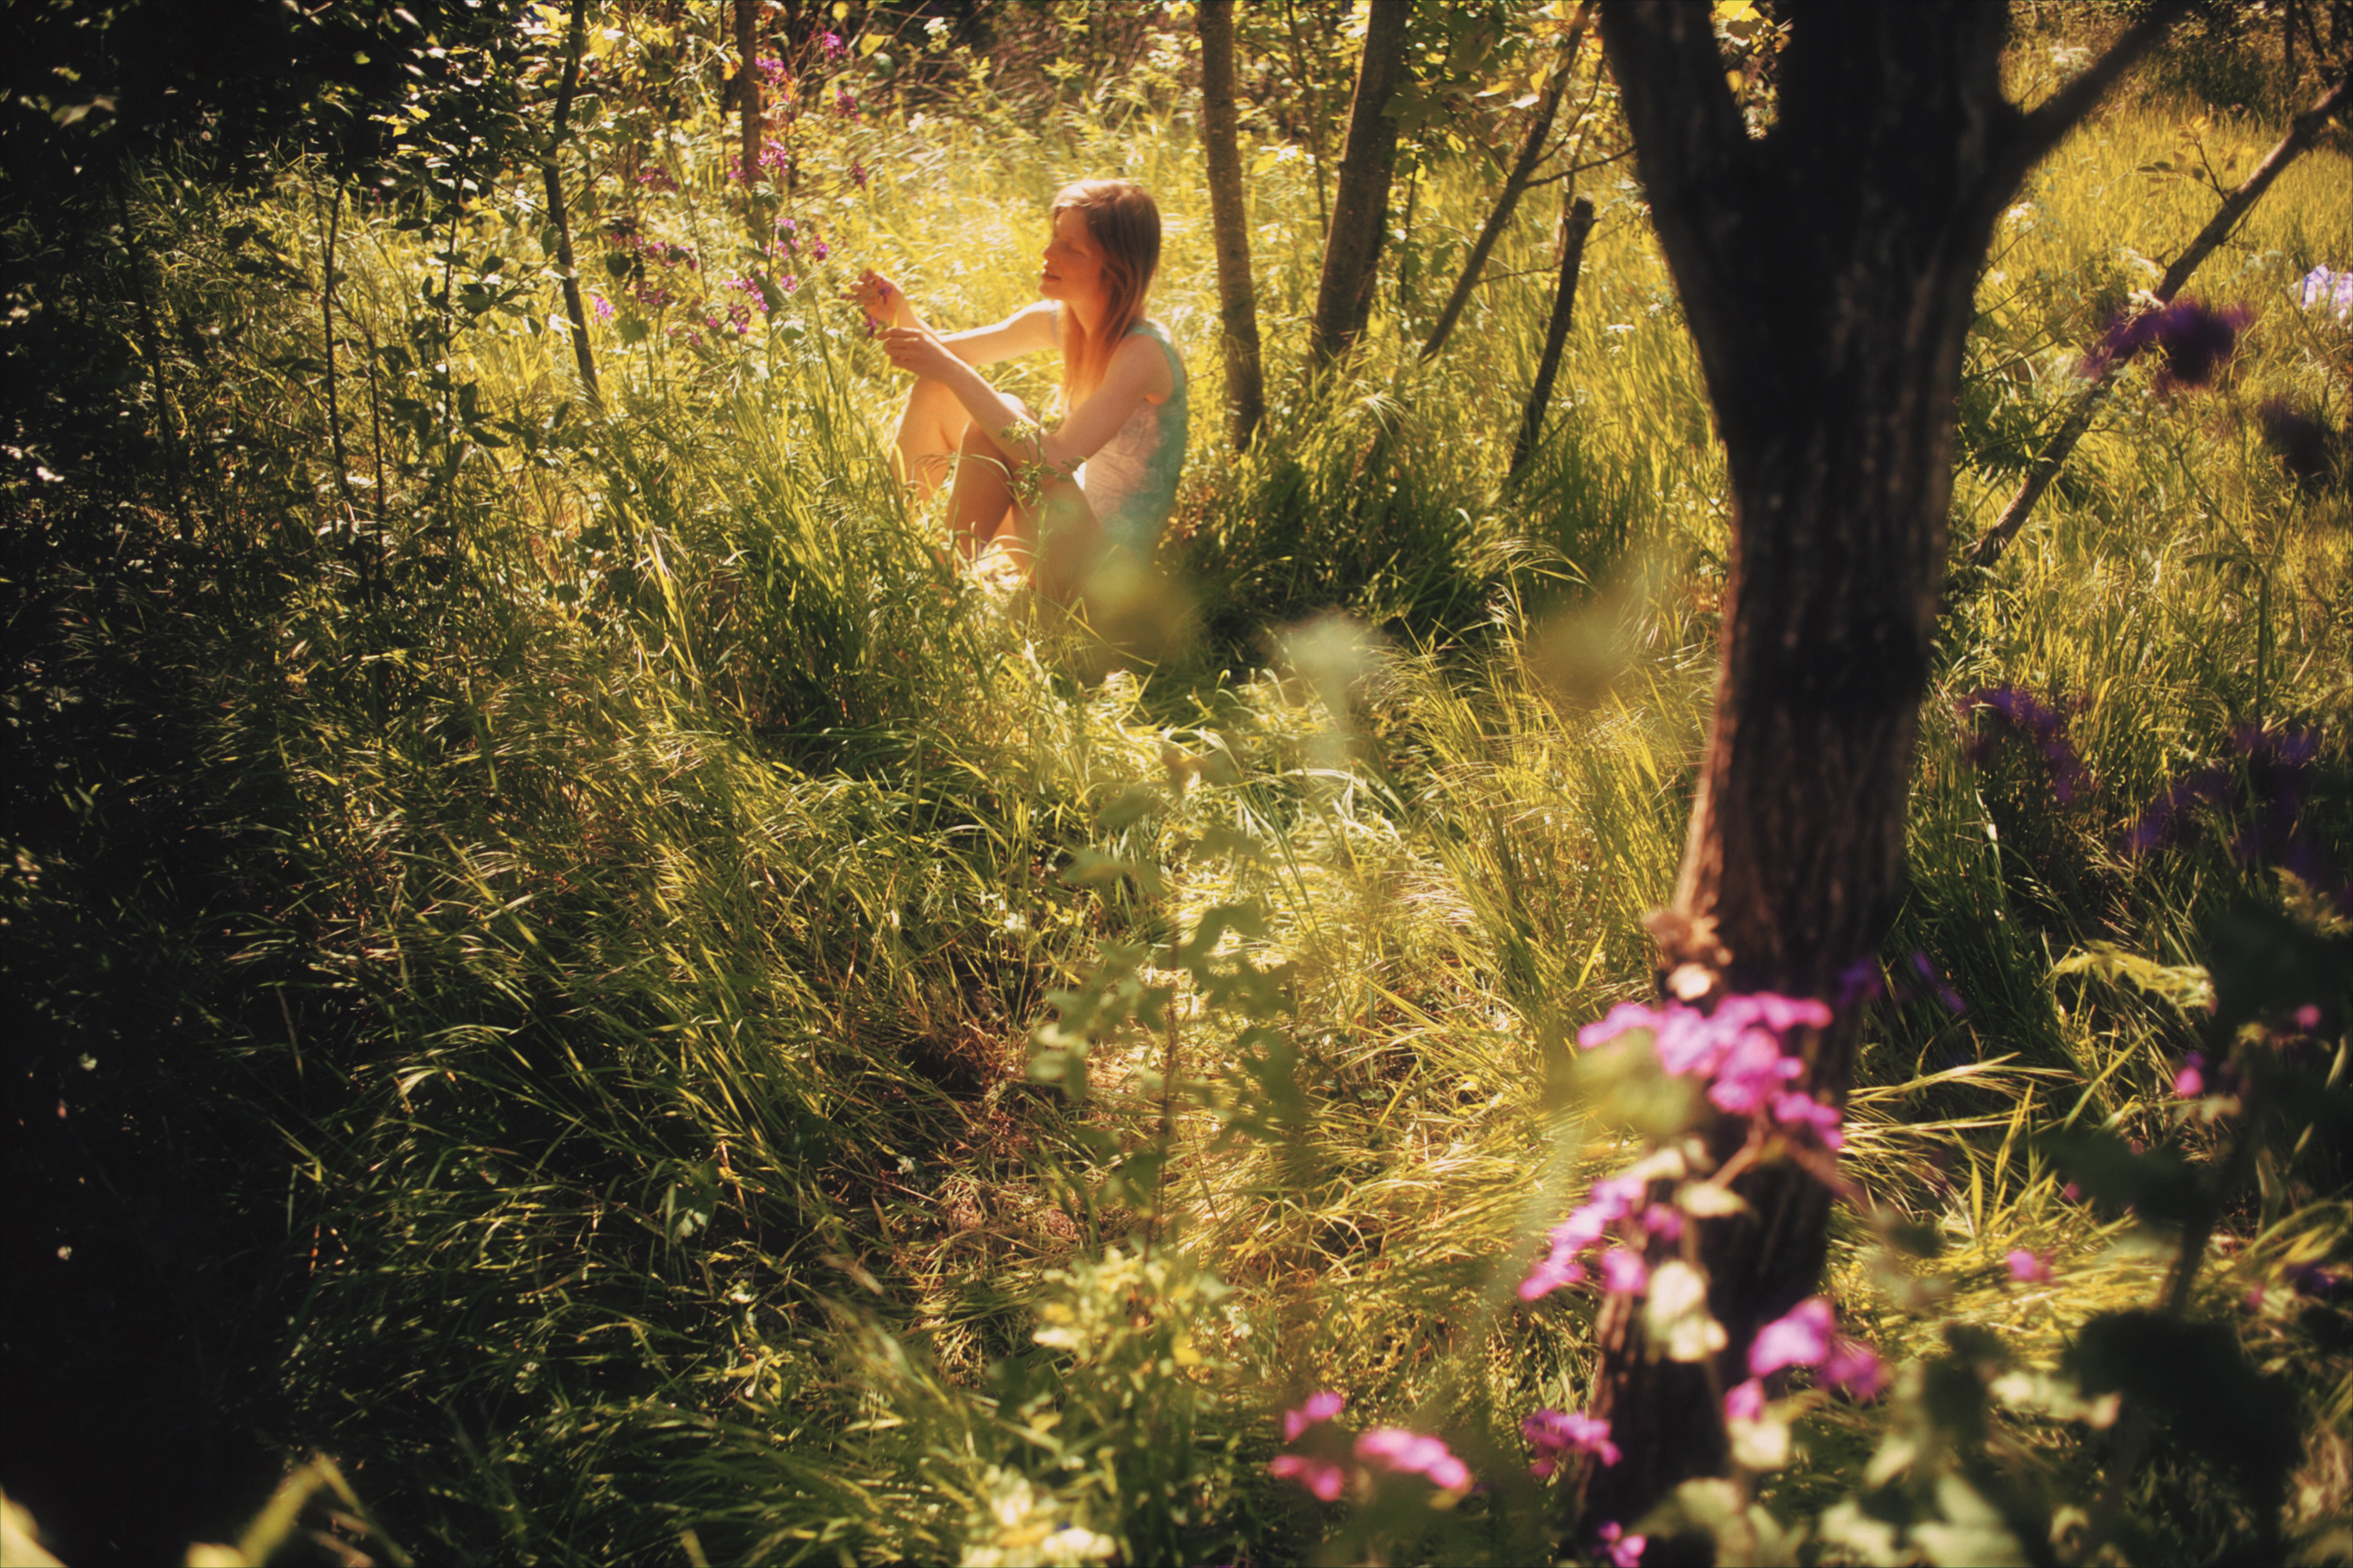 a woman in the grass surrounded by trees and flowers